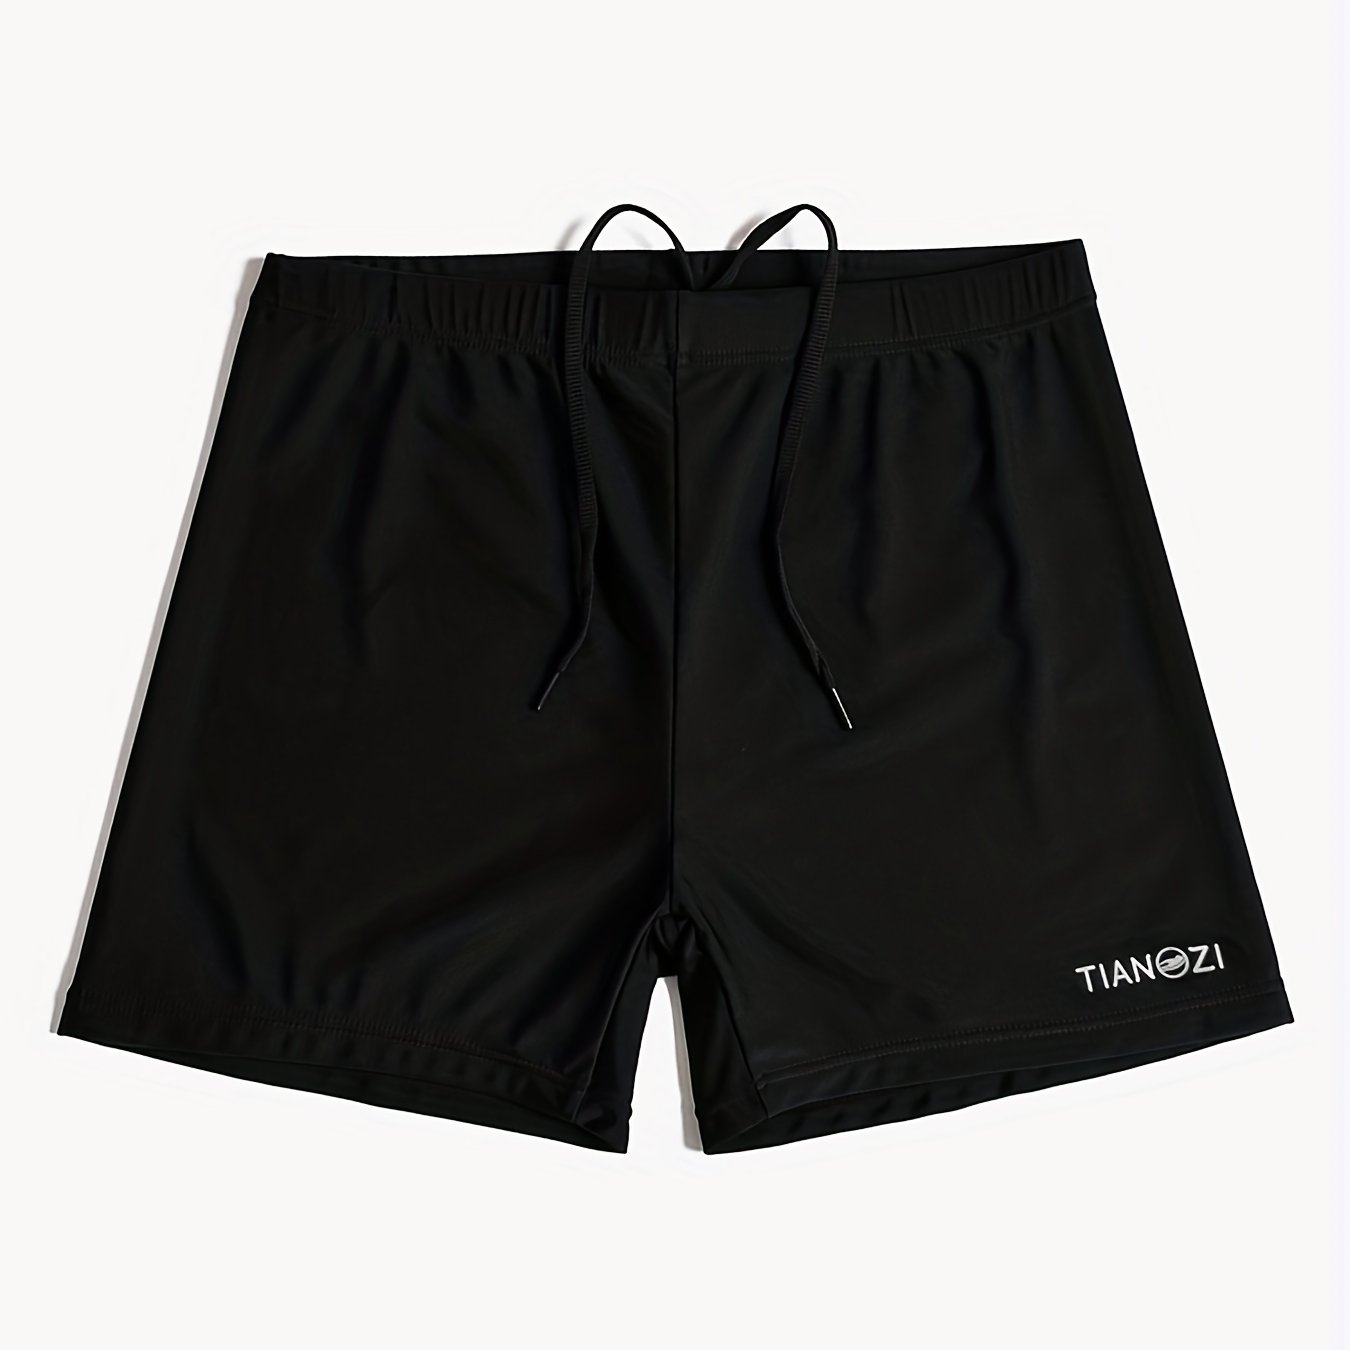 Men's Athletic Swimming Trunks Quick Dry Stretchable Swimming Shorts ...